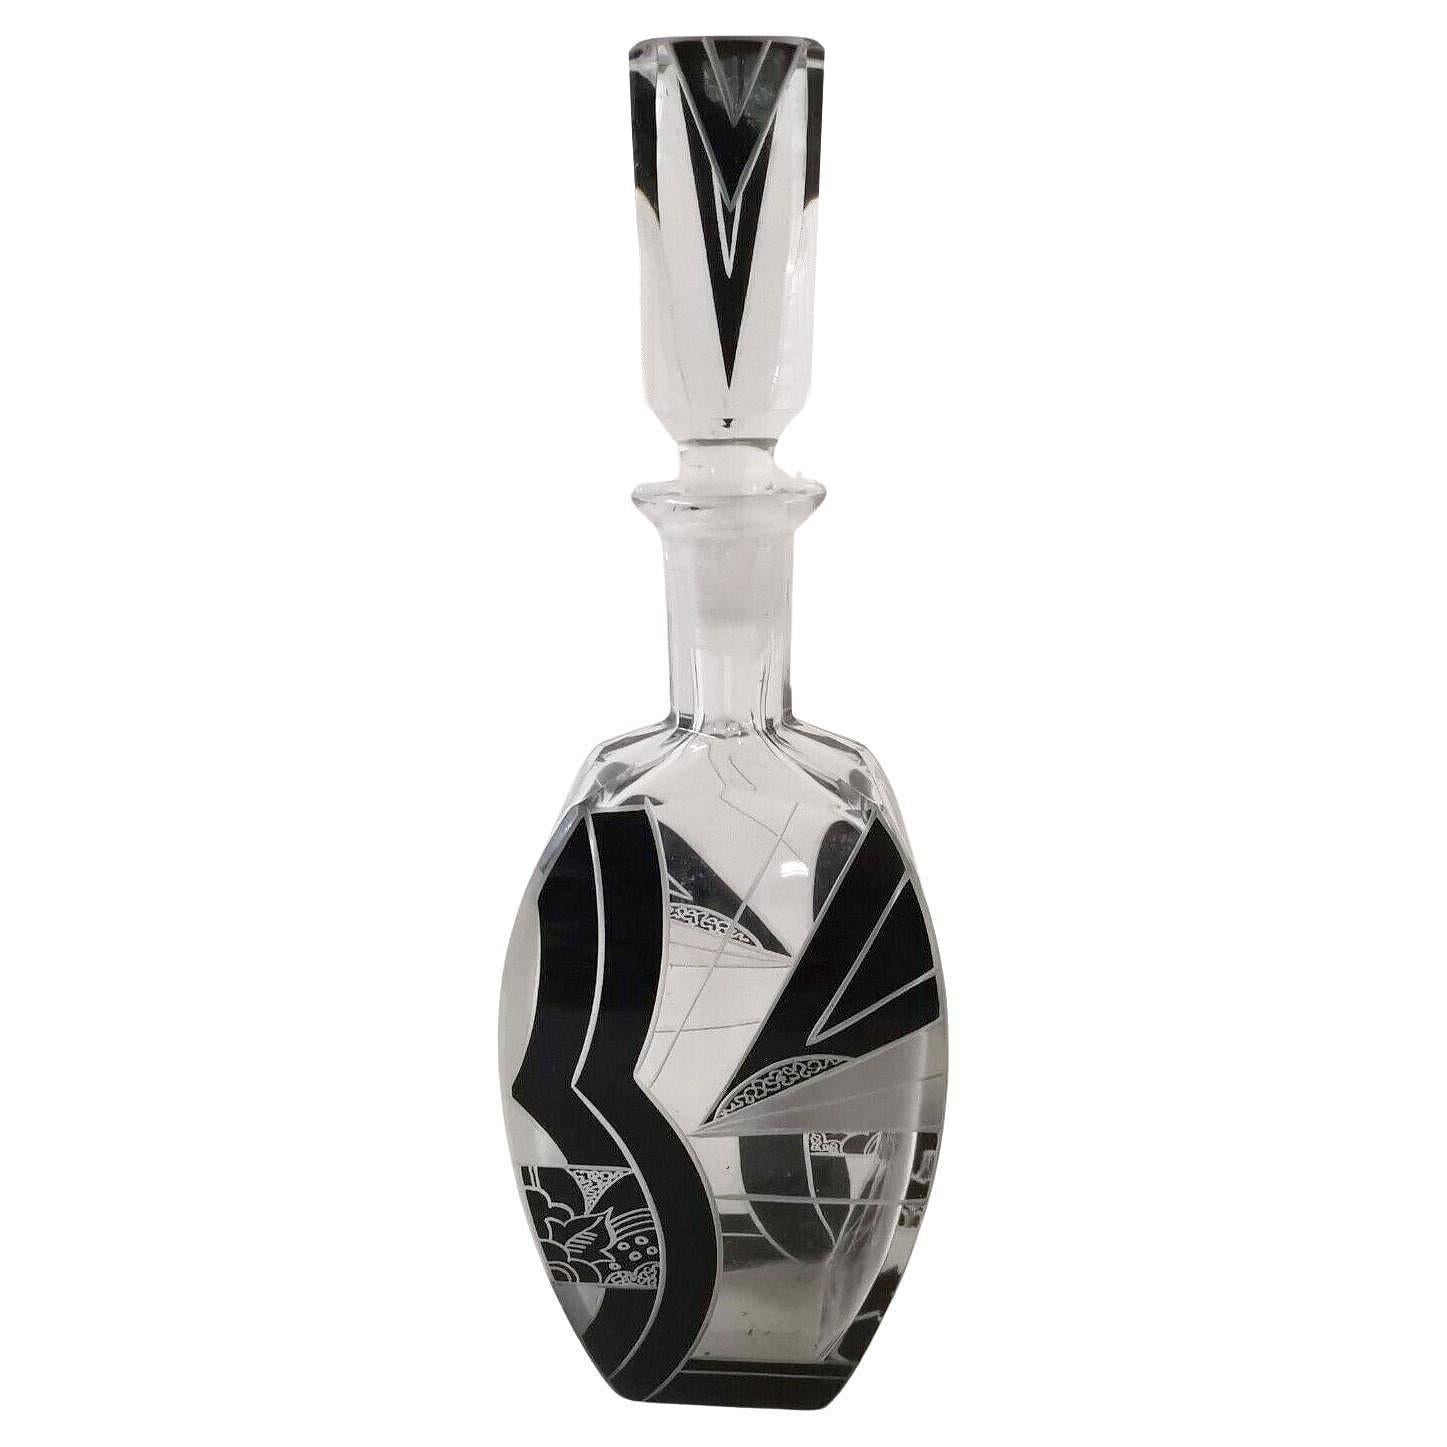 Very stylish Art Deco decanter set comprising decanter , stopper and six glasses. Really attractive shaped to this set, ideal for shots, whiskey and liqueurs. Free from damage, just odd tiny little insignificant mark but generally excellent